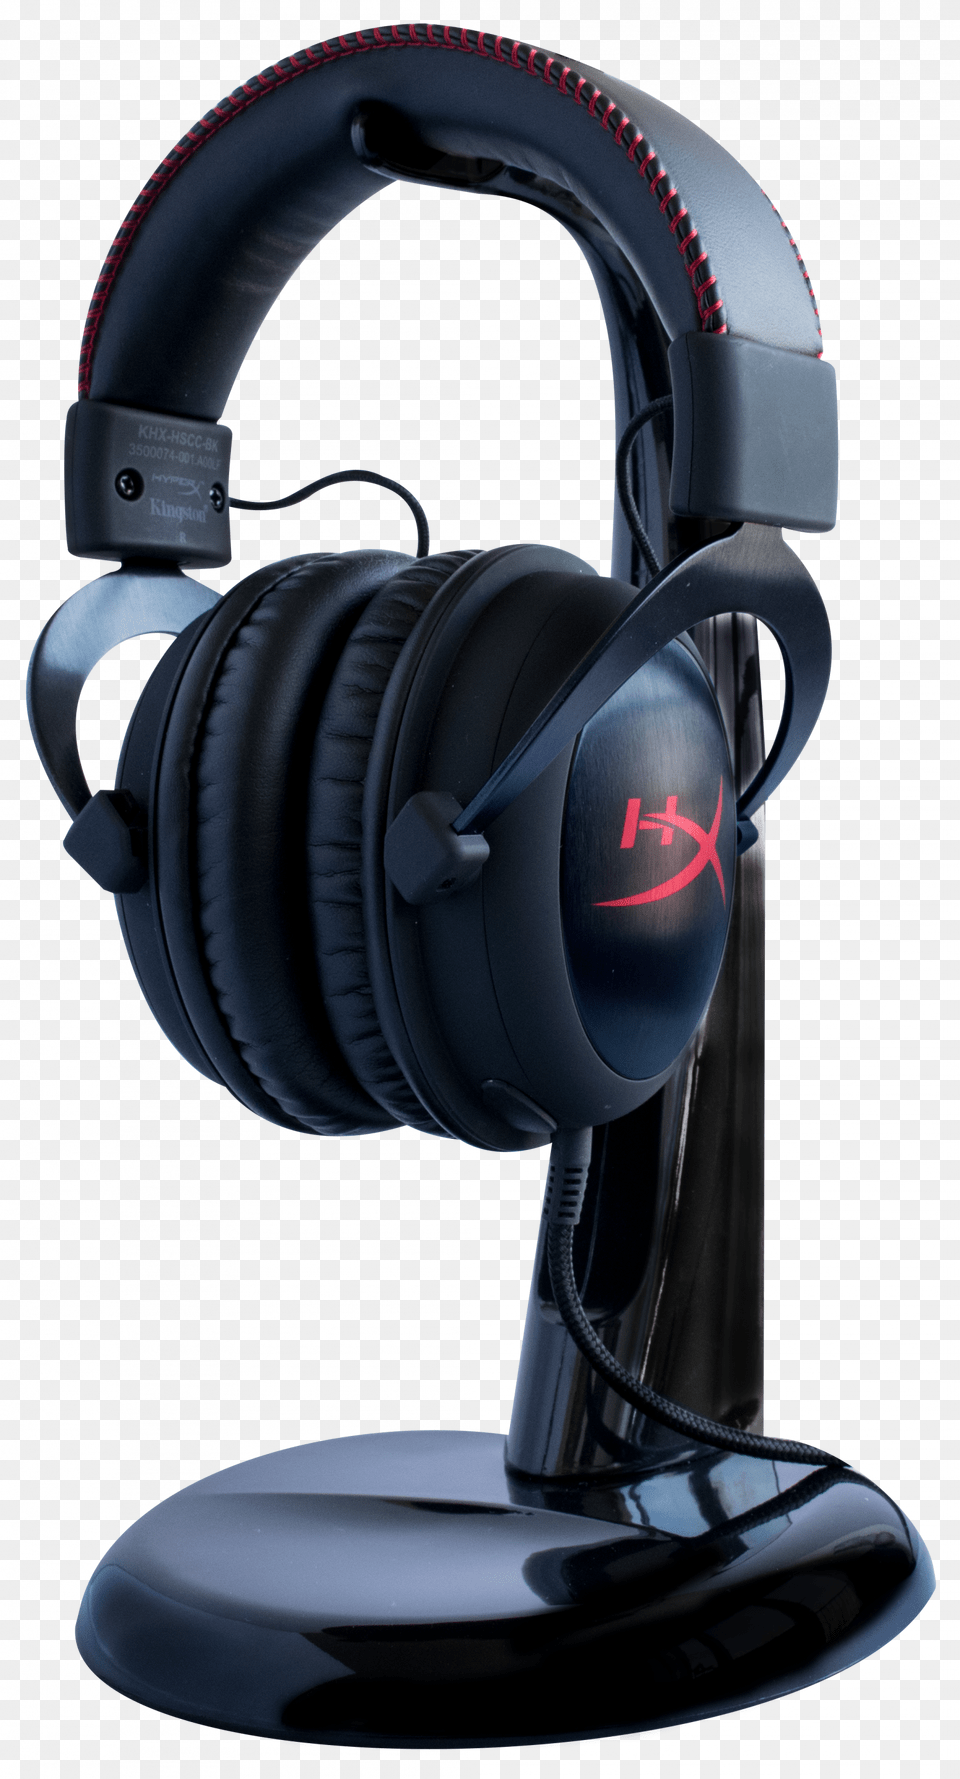 Hyperx Gaming Headset Stand, Electronics, Headphones Free Png Download